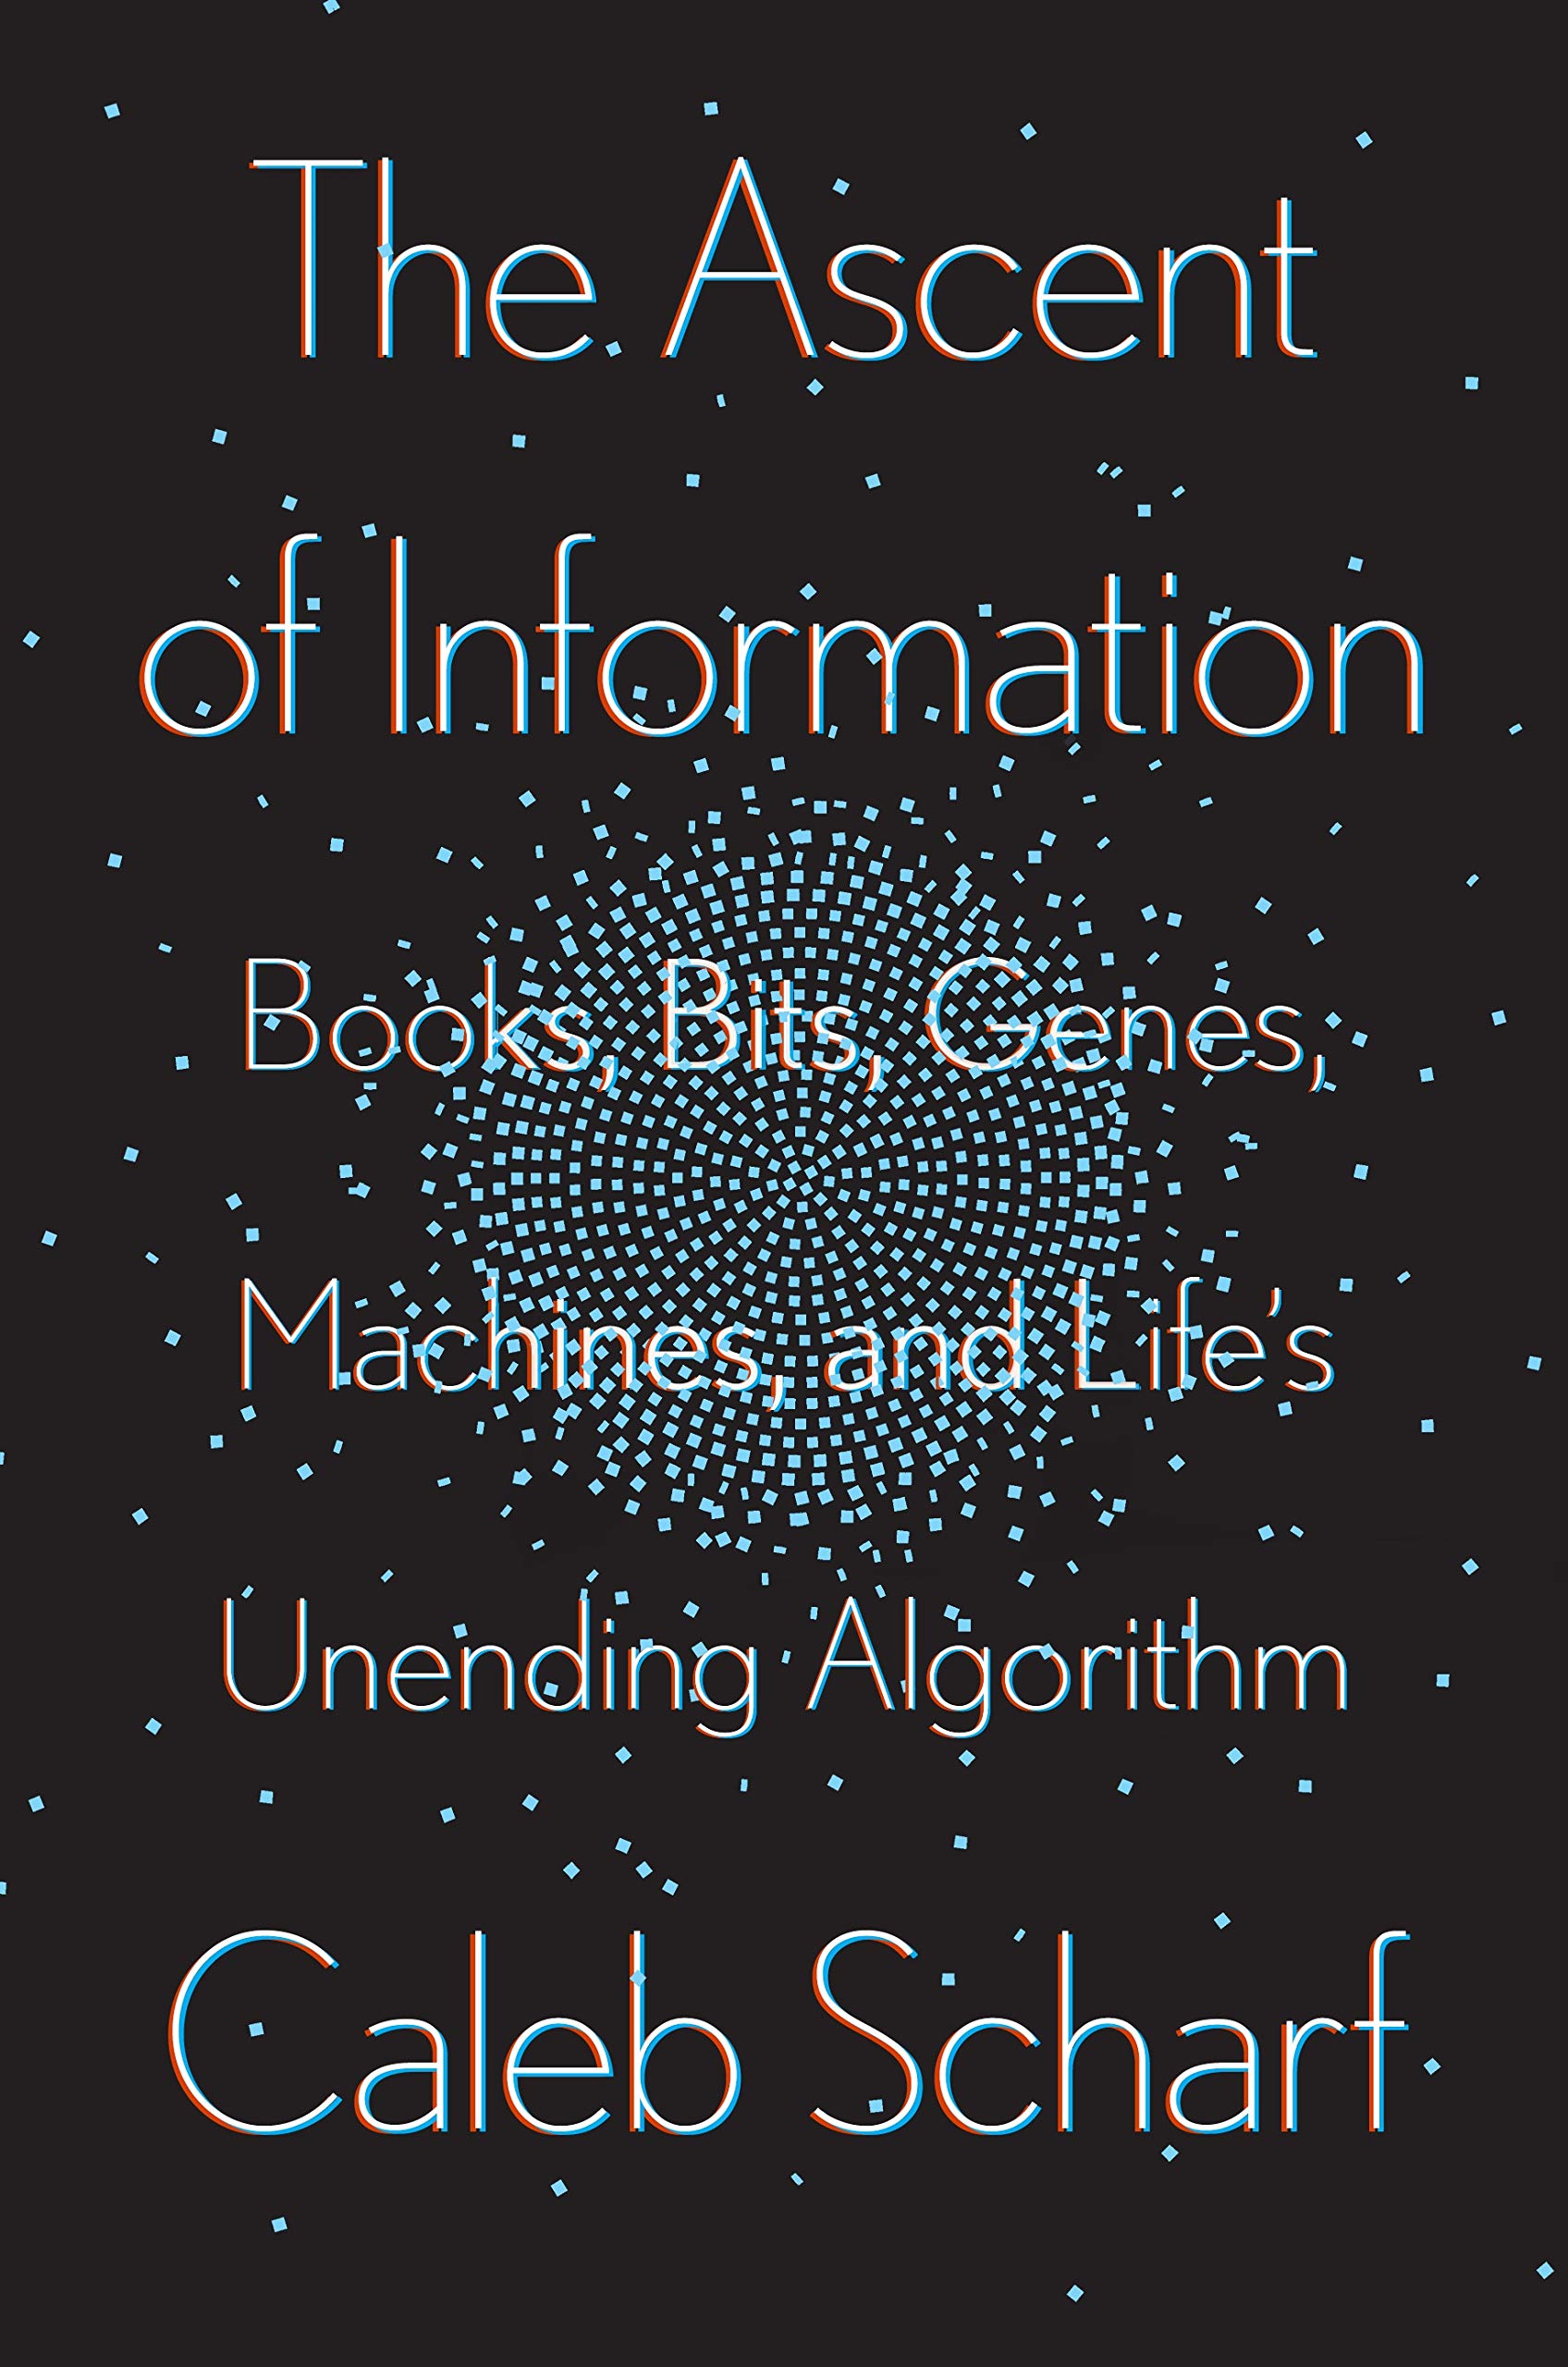 The Ascent of Information: Books, Bits, Genes, Machines, and Life’s Unending Algorithm